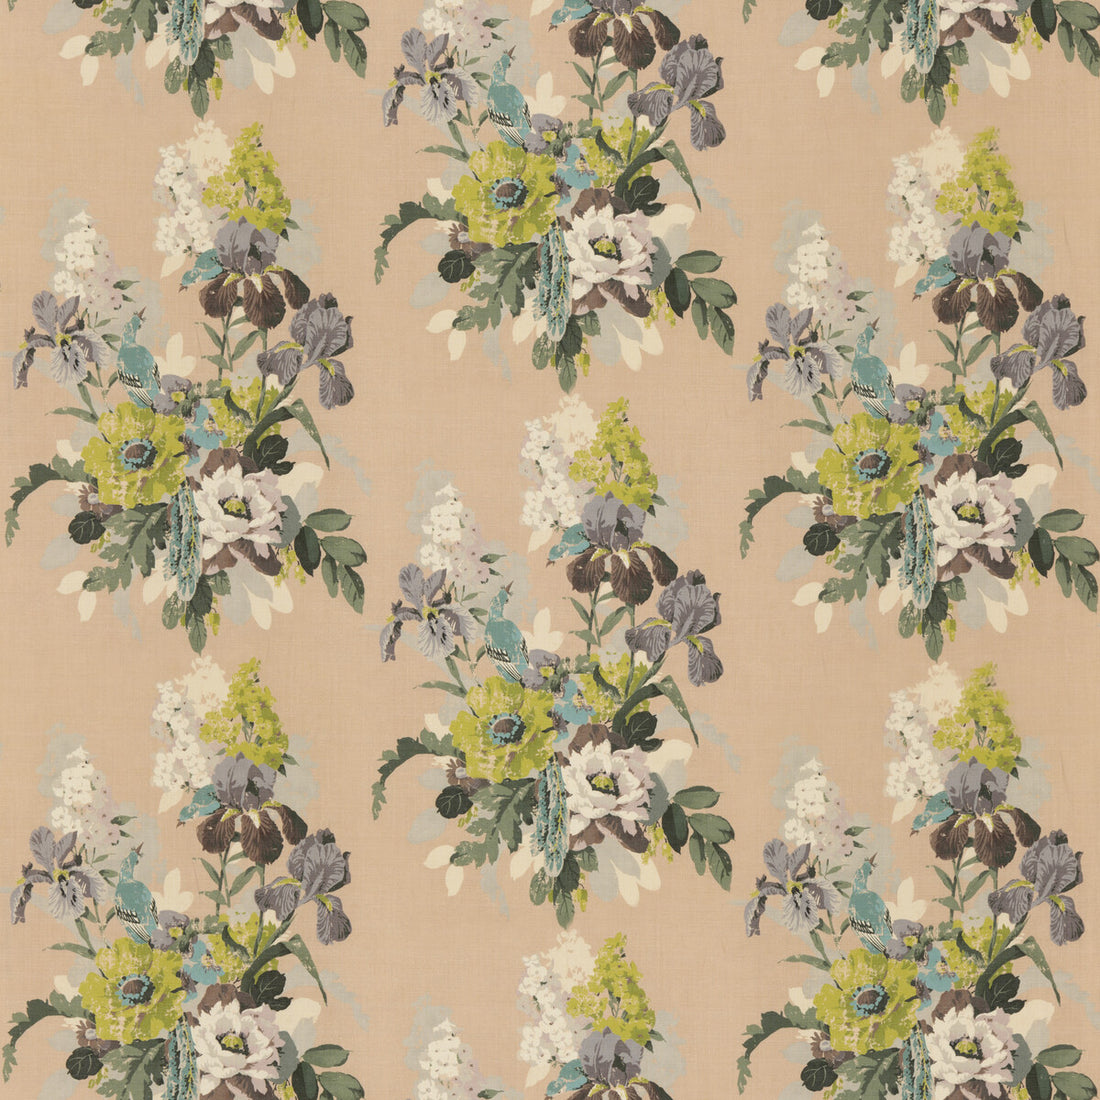 Bird &amp; Iris fabric in blush color - pattern BP10774.1.0 - by G P &amp; J Baker in the Signature Prints collection